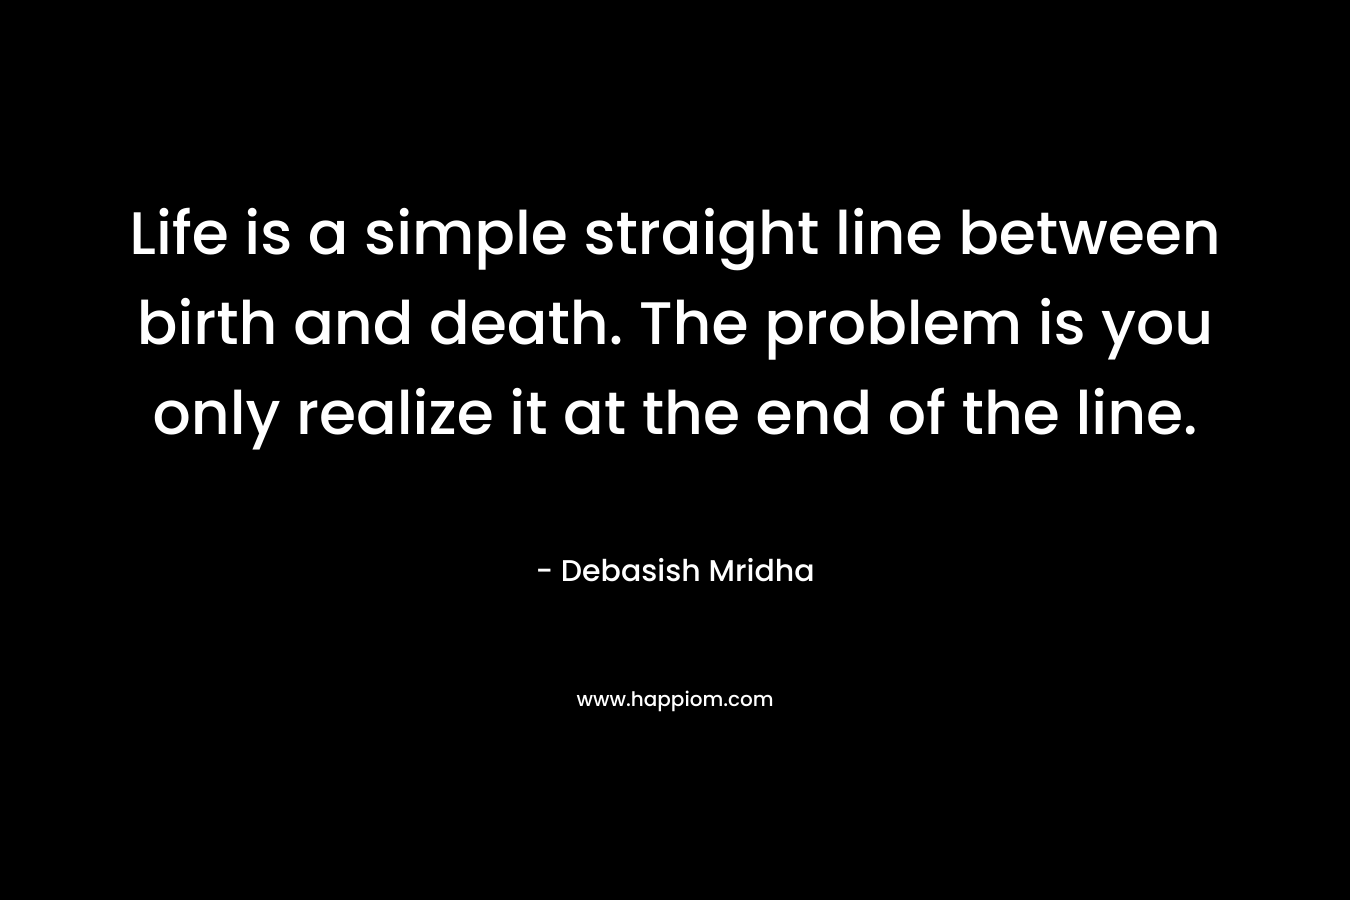 Life is a simple straight line between birth and death. The problem is you only realize it at the end of the line.